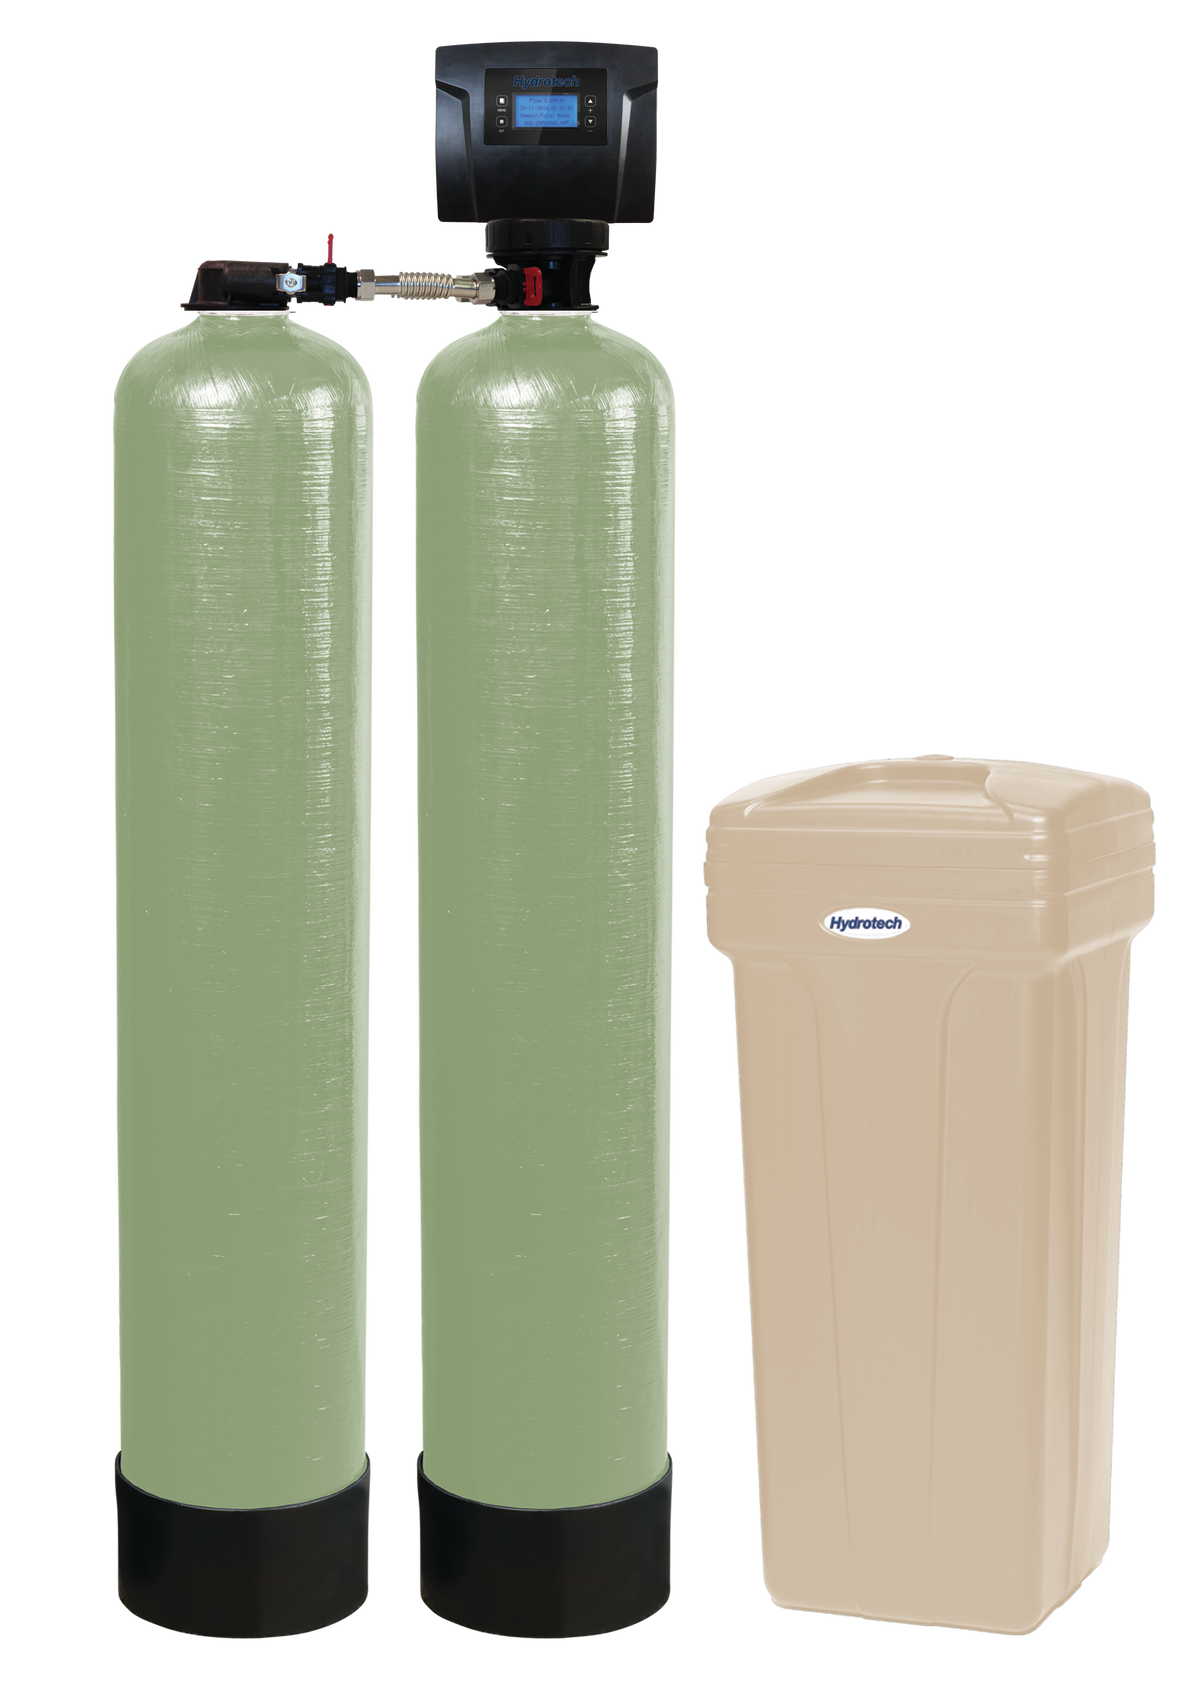 HTO89 Deluxe Dual Tank Whole Home Water Refining System